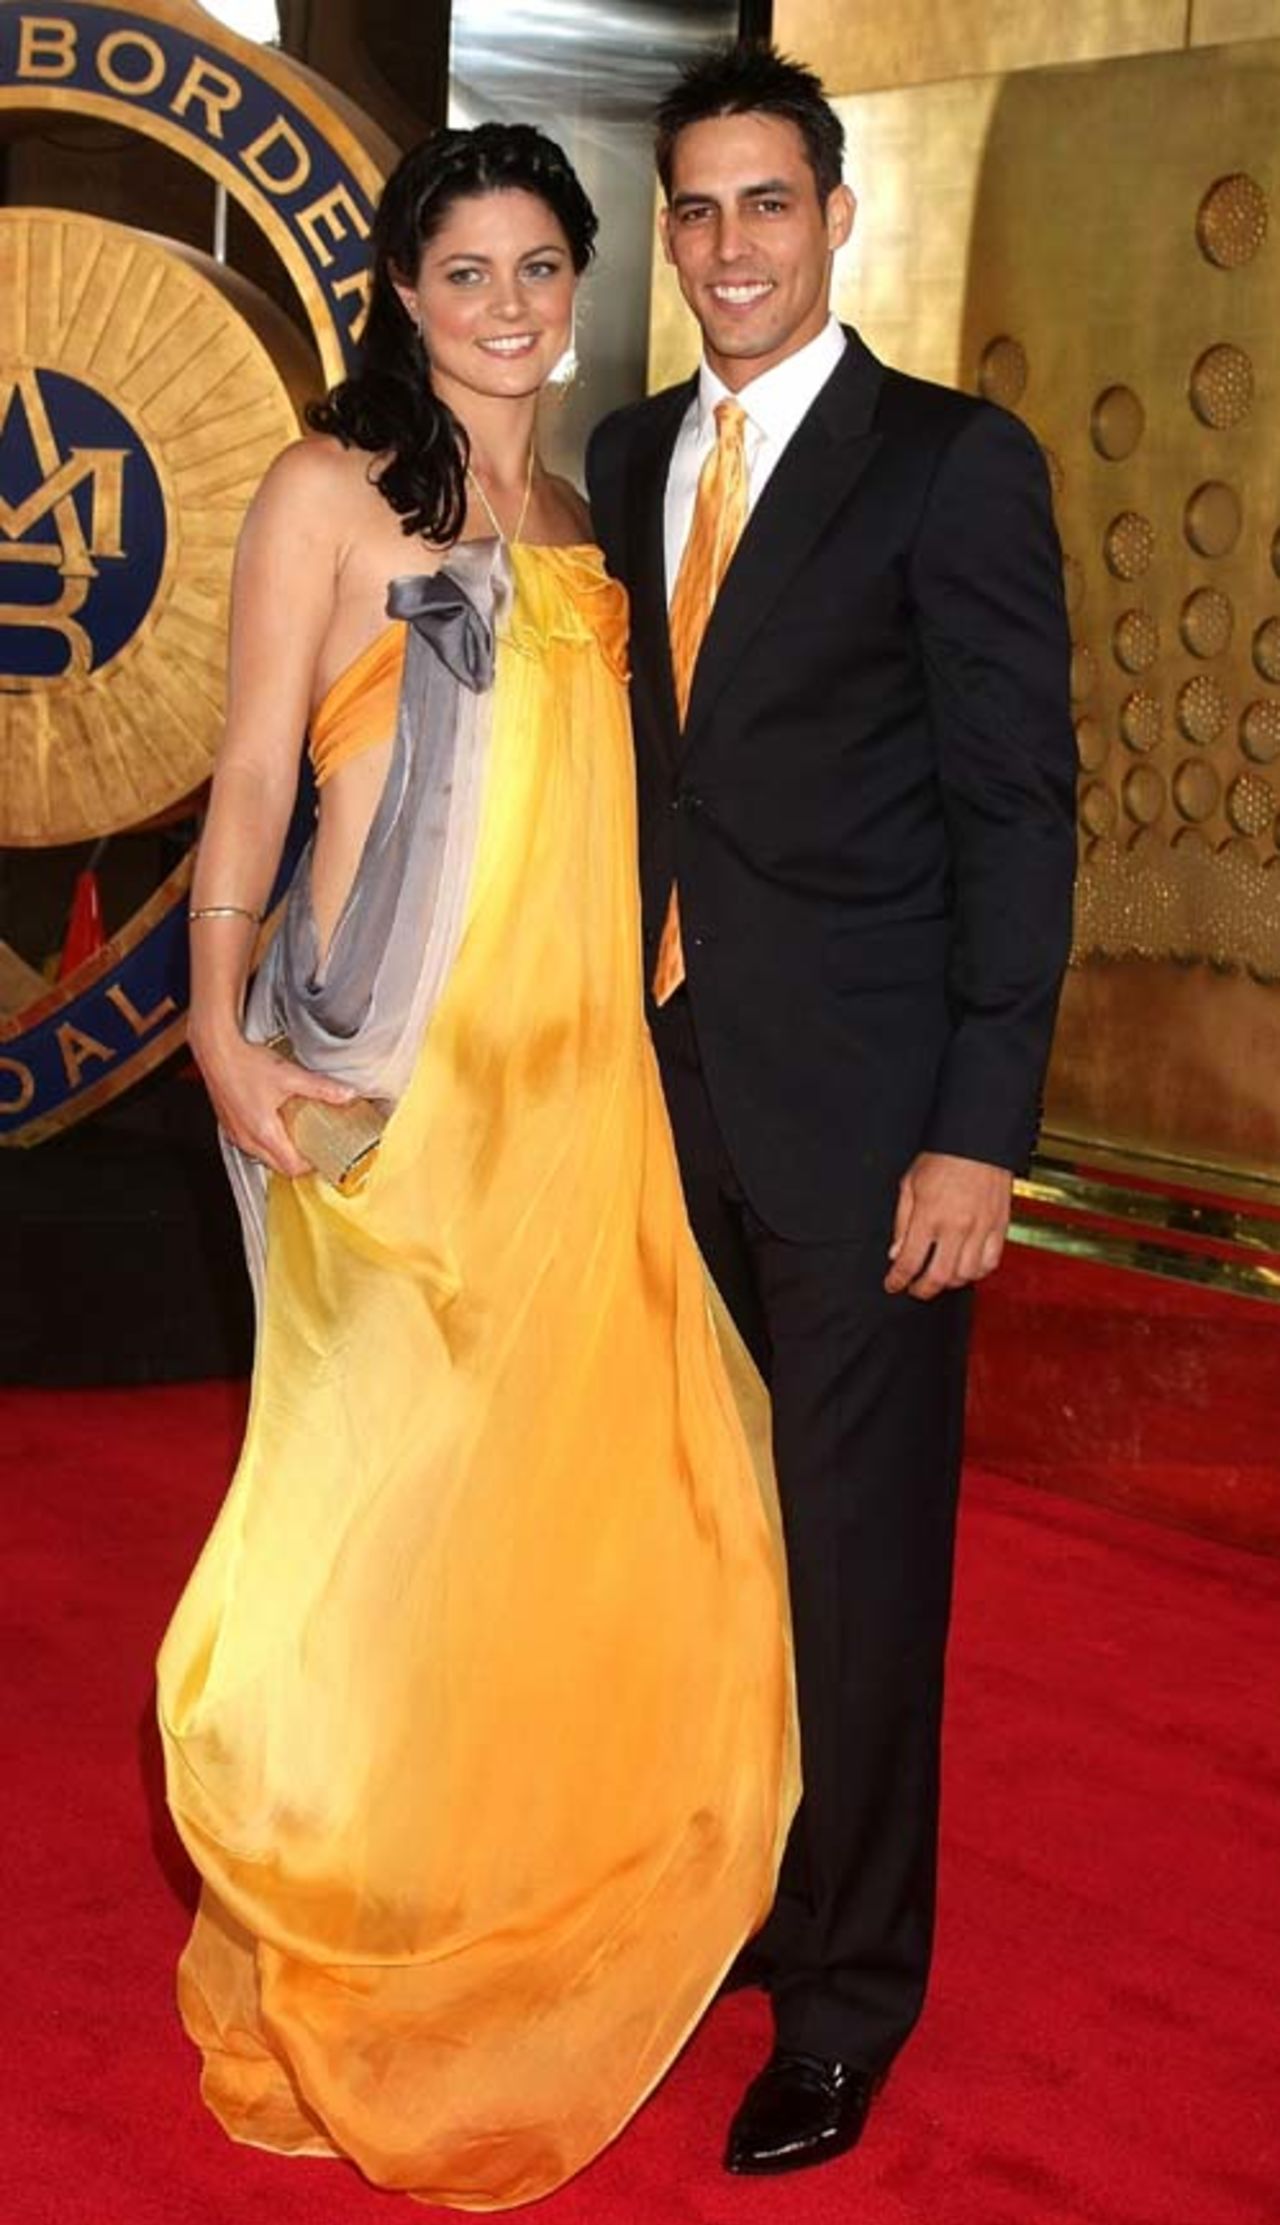 Mitchell Johnson poses with partner Jessica Bratich at the 2009 Allan Border Medal, Melbourne, February 3, 2009